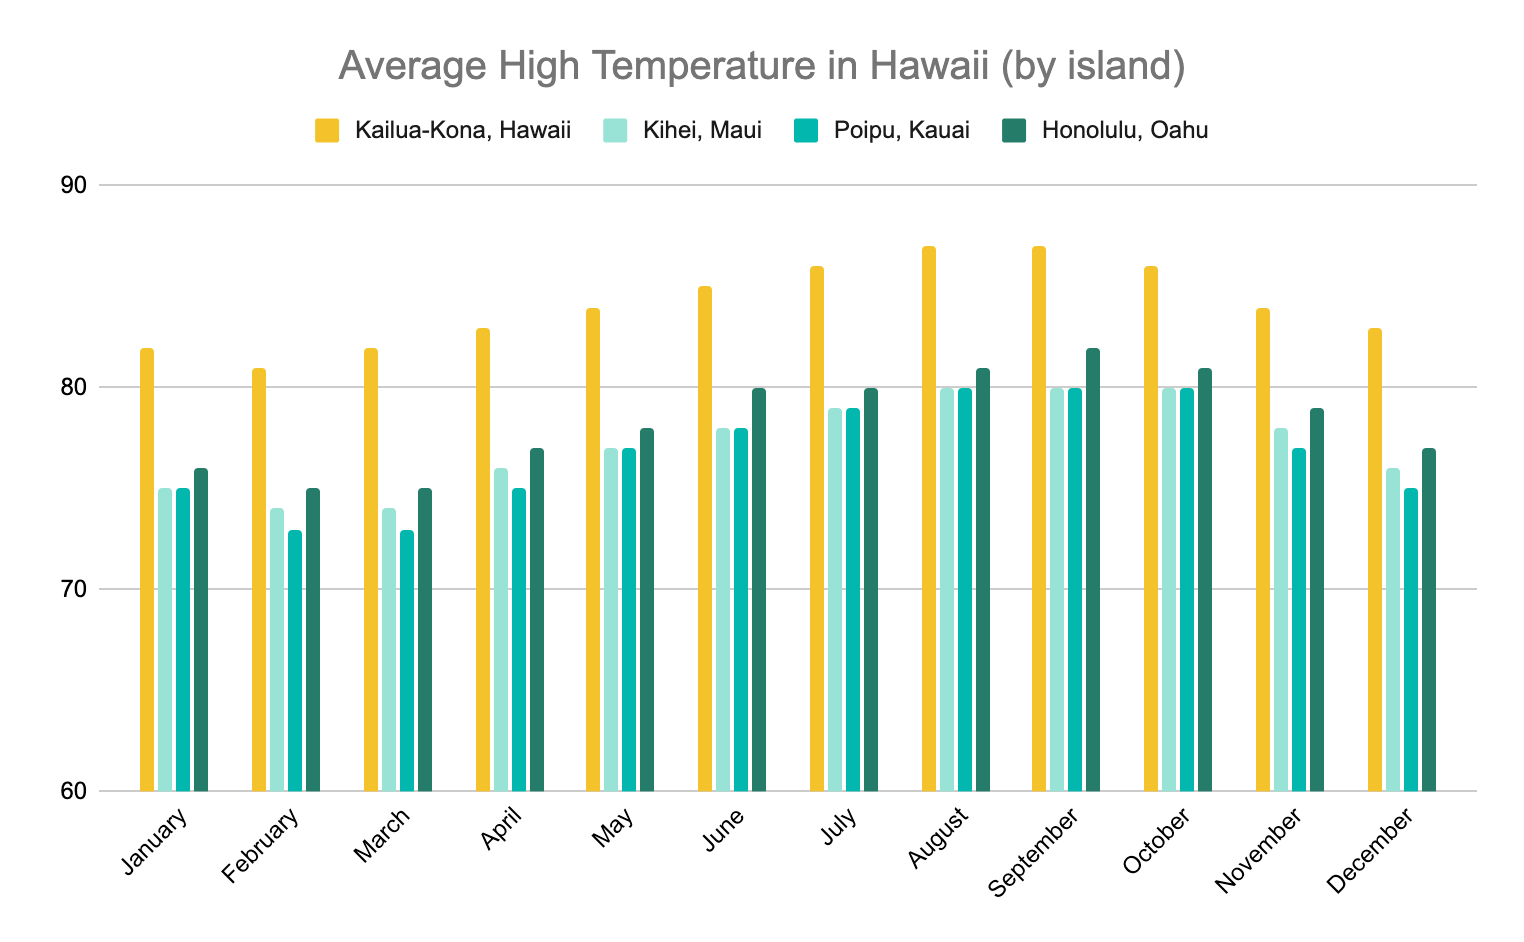 Hawaii in August - Average high temperature (F) the Big Island is the hottest year-round, other islands experience mid- to high-70s January through May with temperatures peaking August through October around 80 degrees.